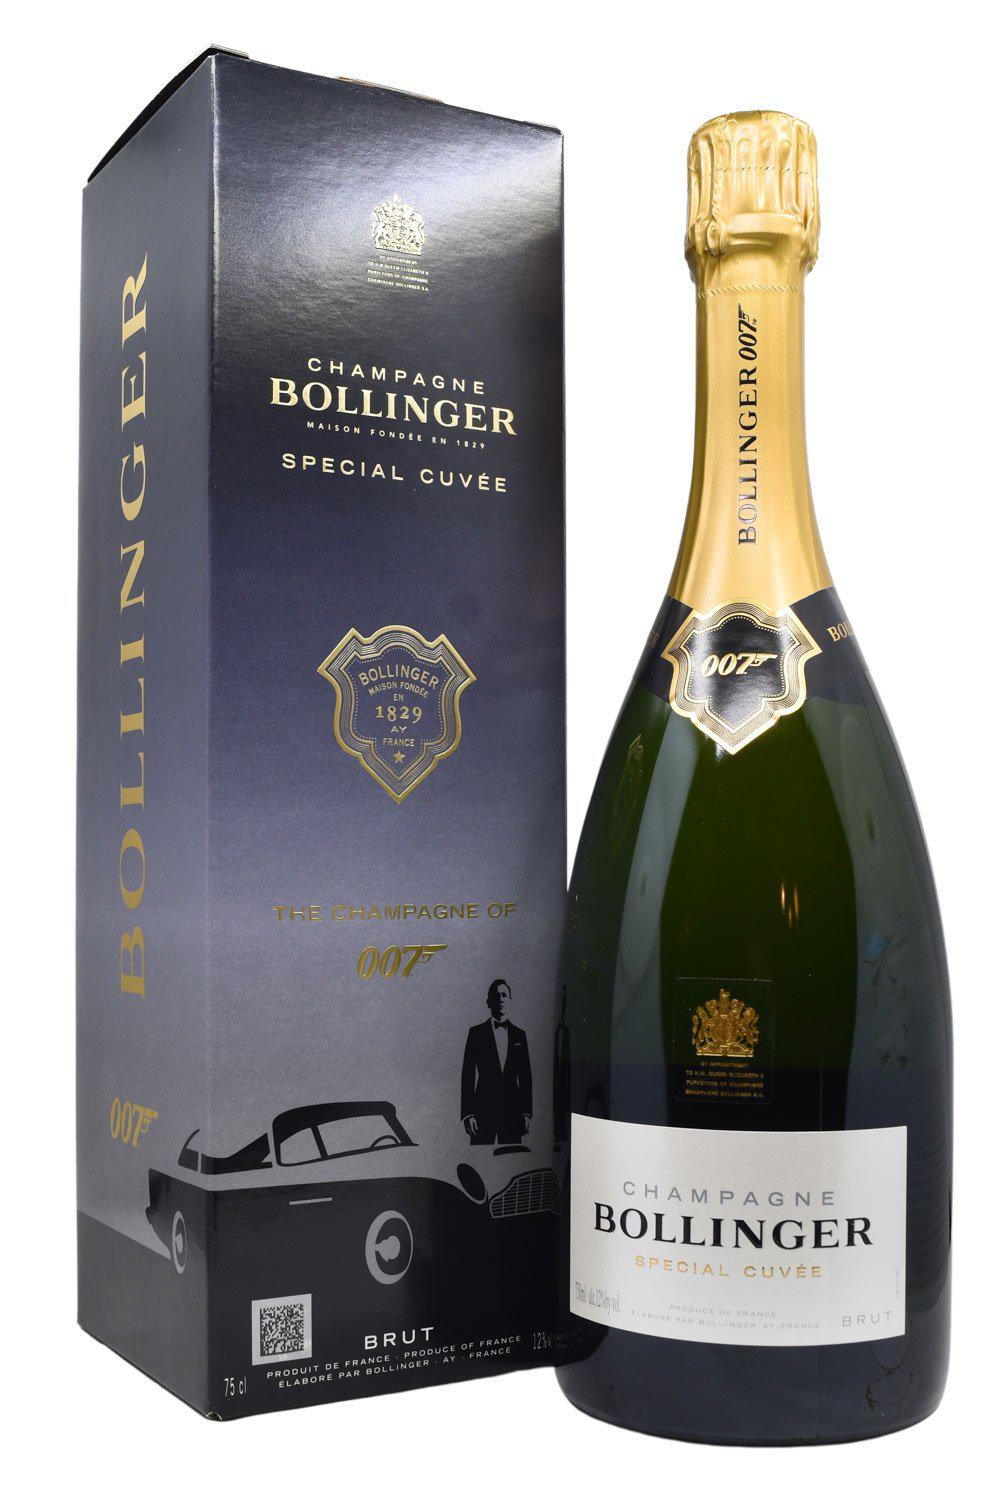 Bollinger Champagne Brut Special Cuvee 007 Limited Edition NV – Flatiron SF